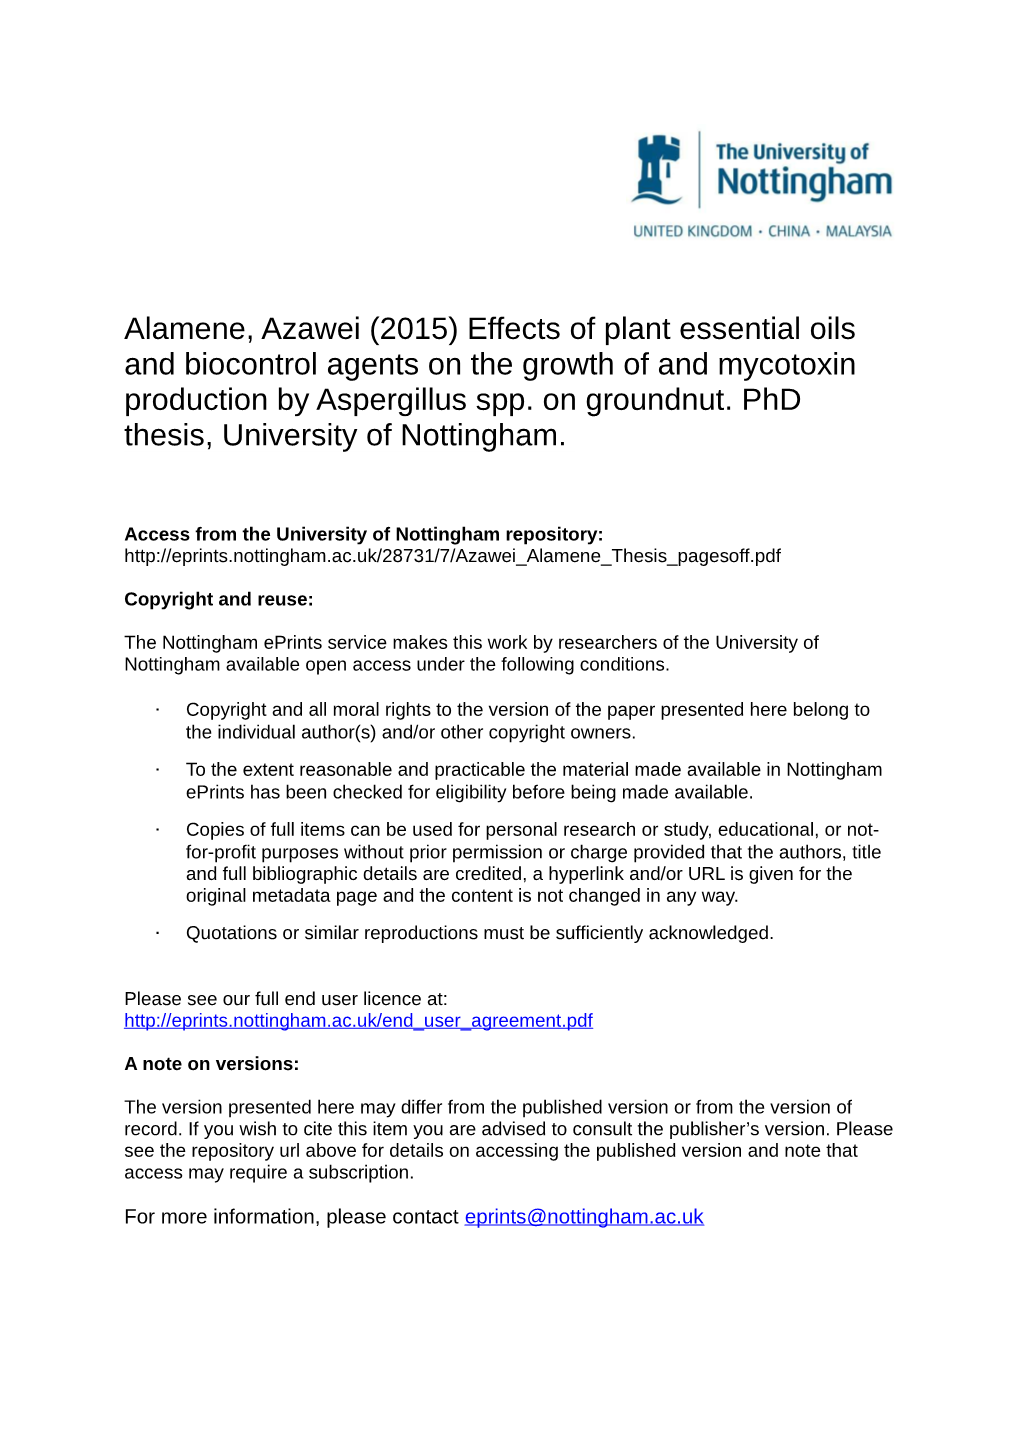 Effects of Plant Essential Oils and Biocontrol Agents on the Growth of and Mycotoxin Production by Aspergillus Spp